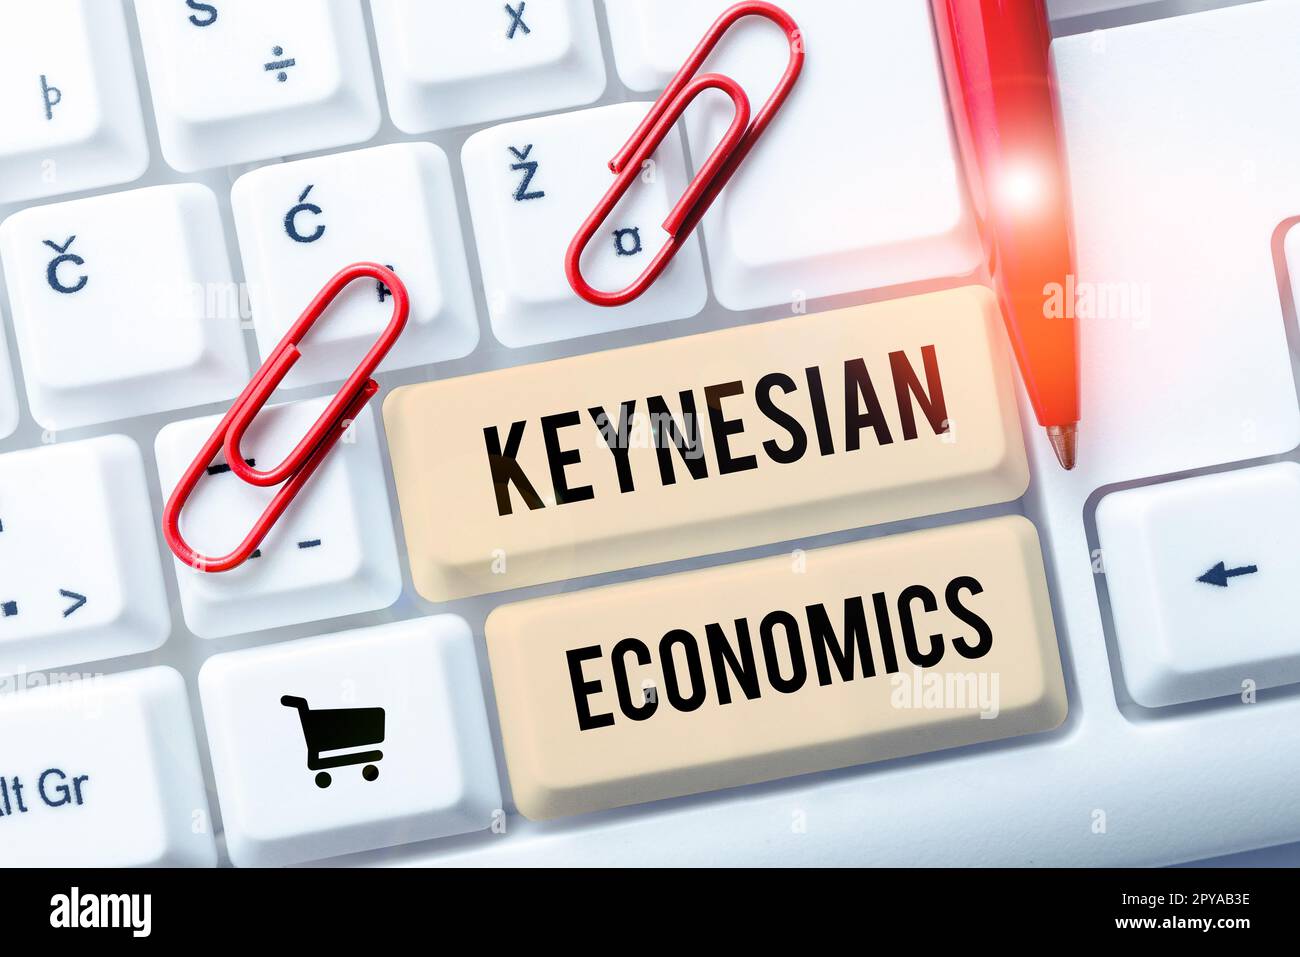 Sign displaying Keynesian Economics. Business approach monetary and fiscal programs by government to increase employment Stock Photo